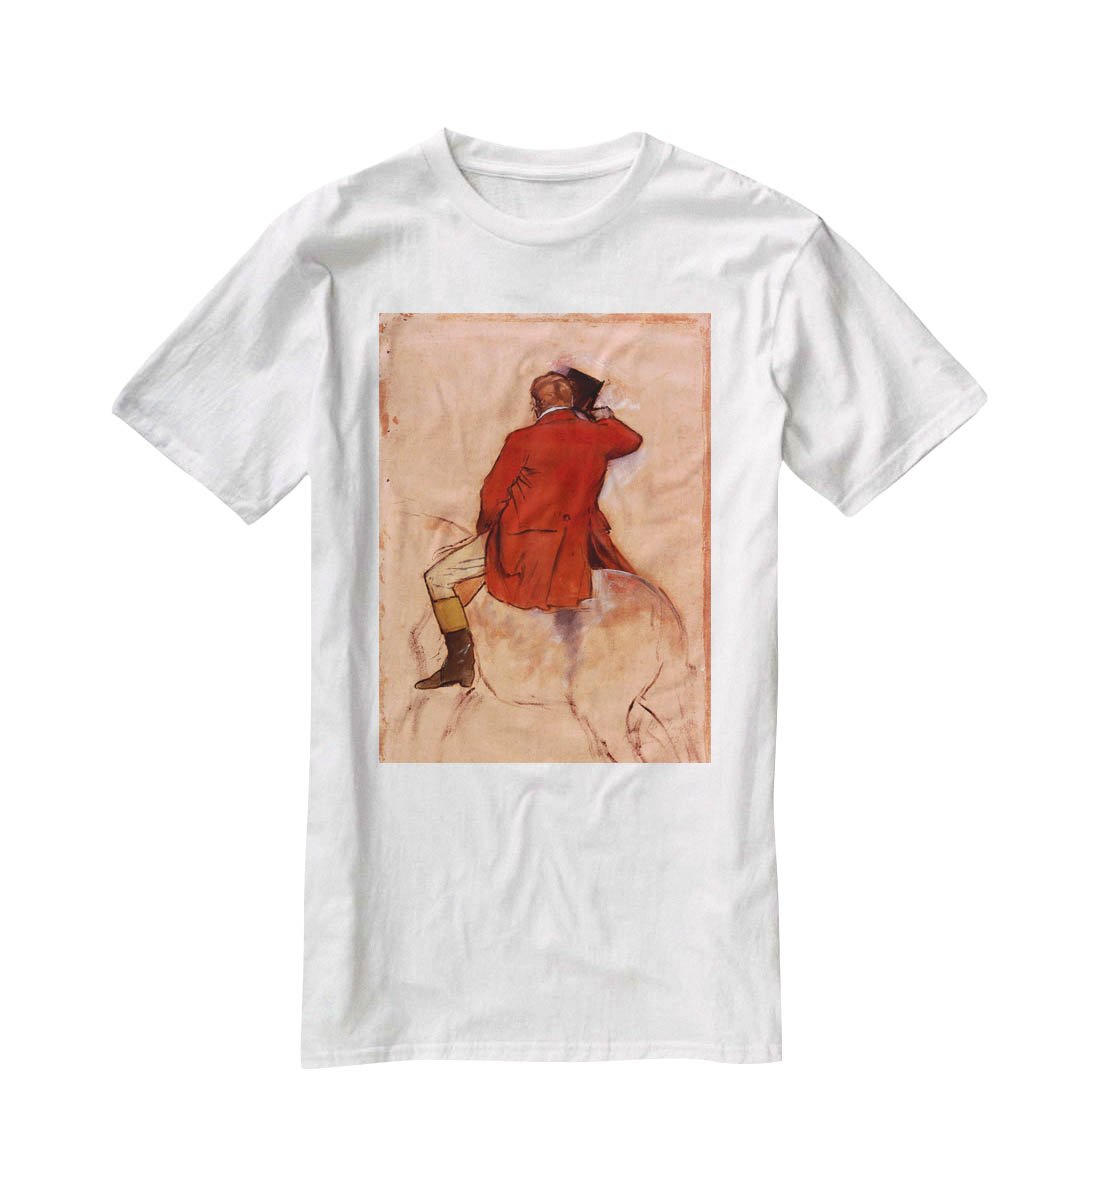 Rider with red jacket by Degas T-Shirt - Canvas Art Rocks - 5